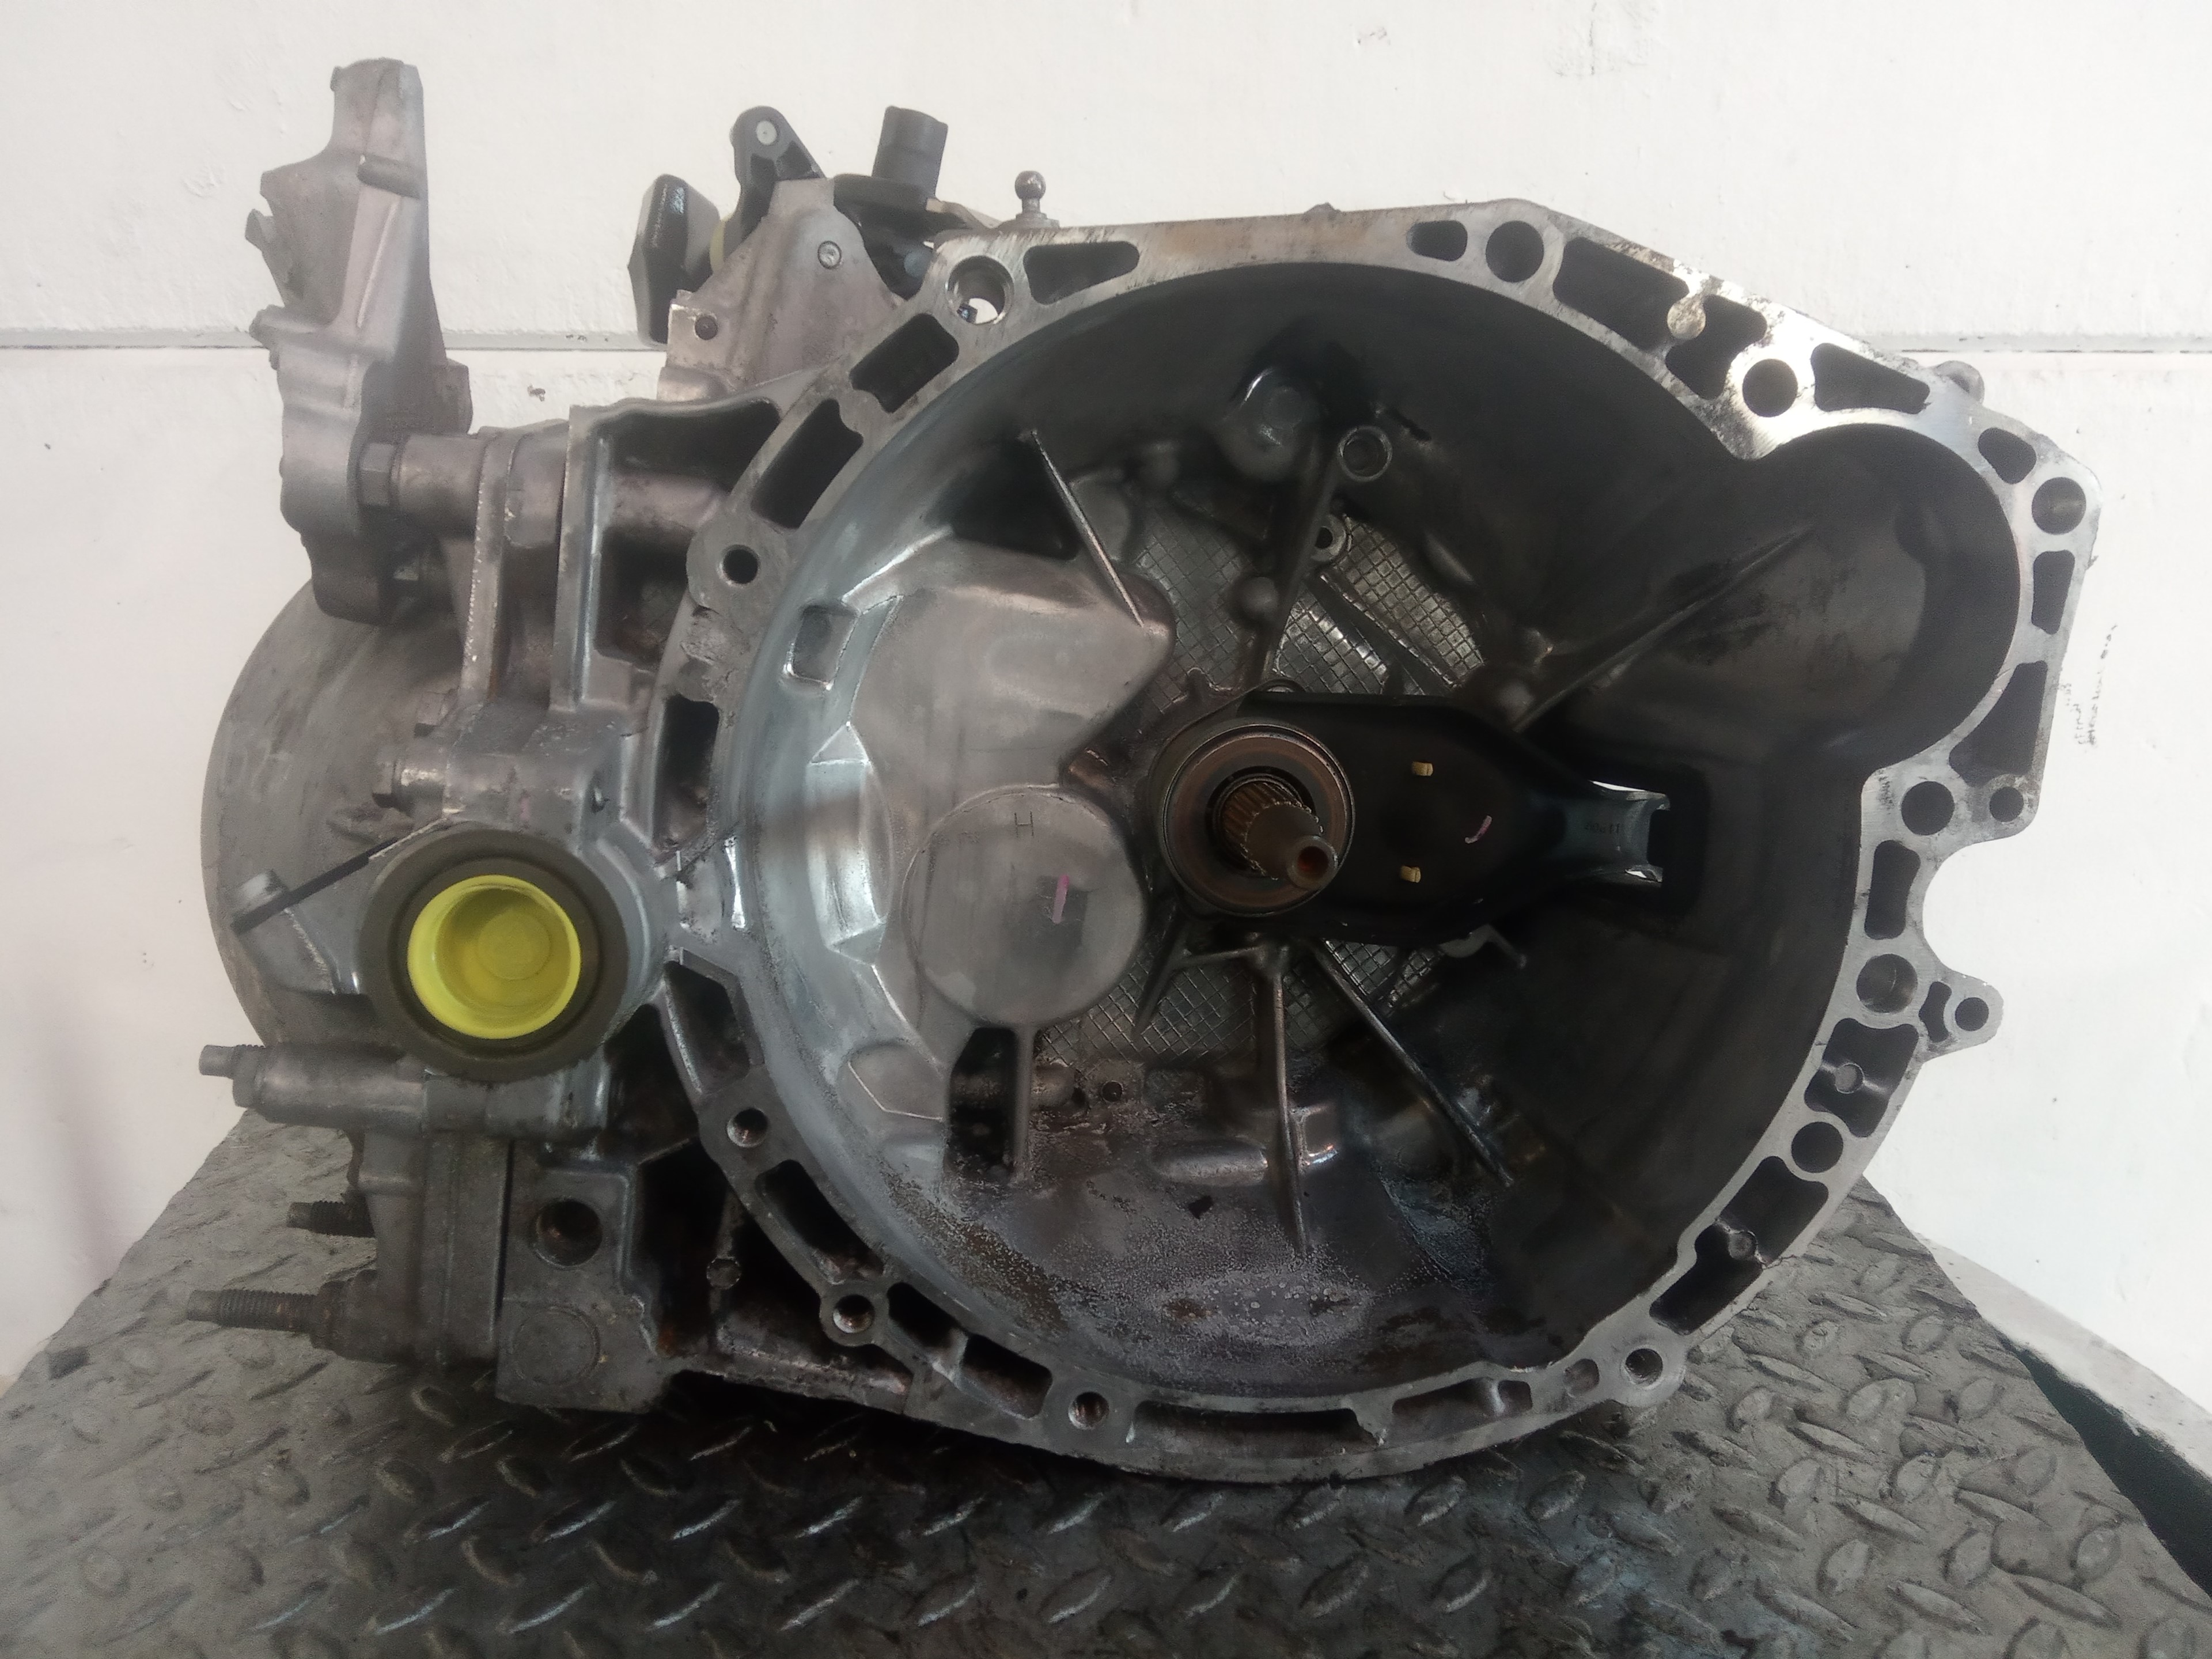 PEUGEOT 508 1 generation (2010-2020) Gearbox 20MB27, 20MB27 23690120